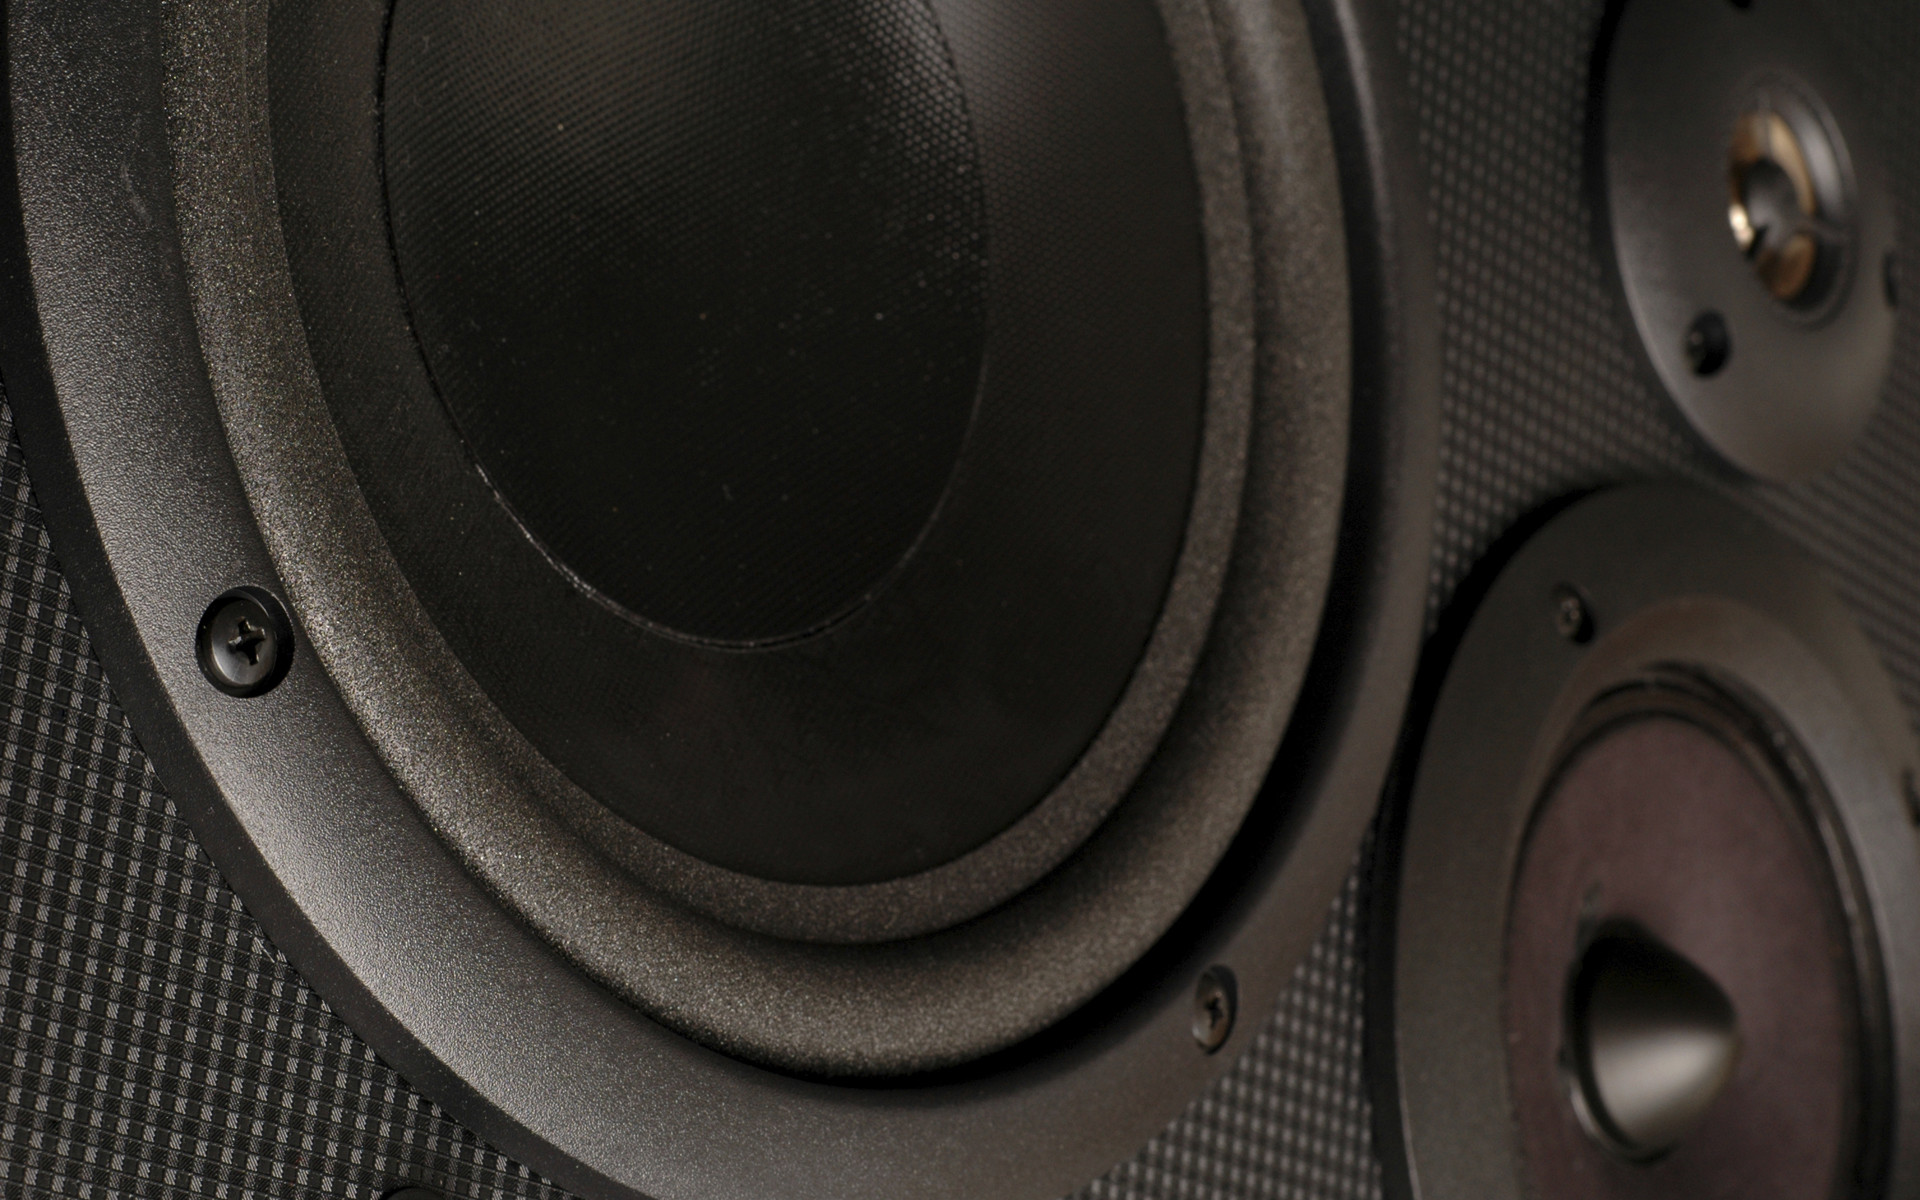 1920x1200 ... Subwoofer Speaker Wallpapers - Android Apps on Google Play ...